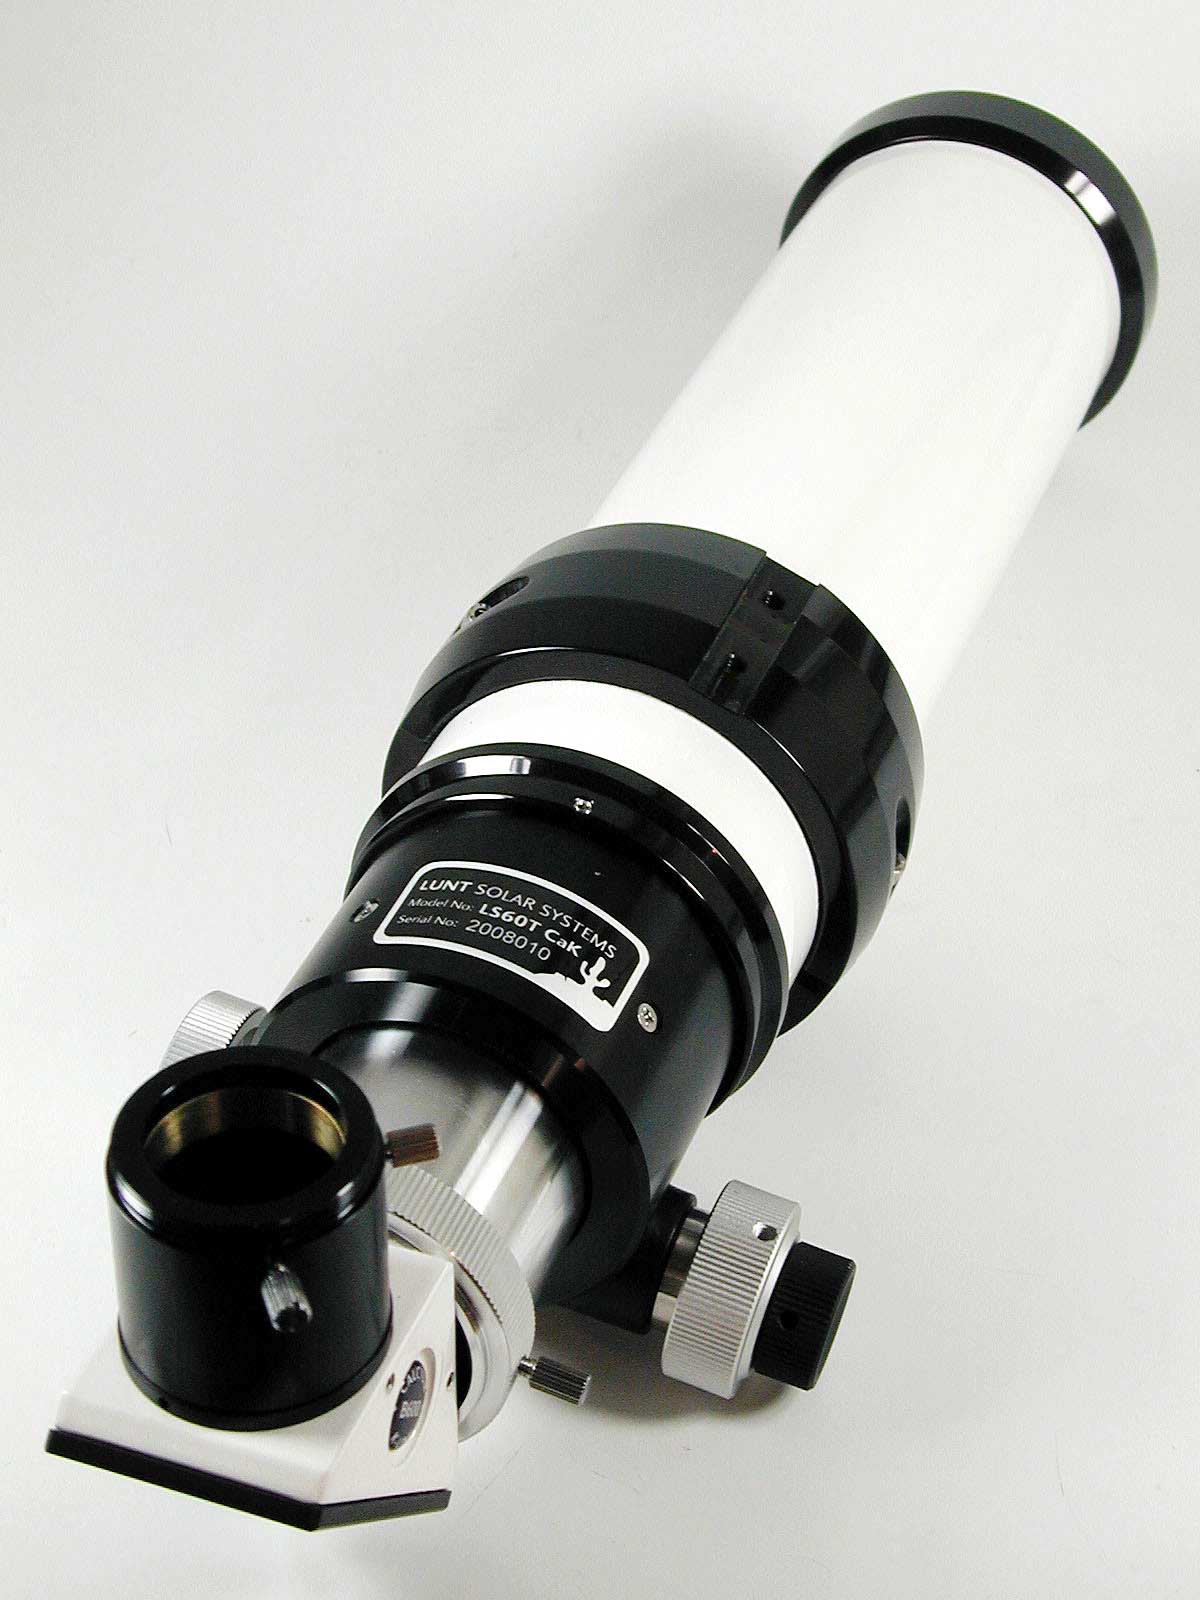 Lunt 60mm CaK Telescope w/ B600 with 2" Feather Touch Focuser